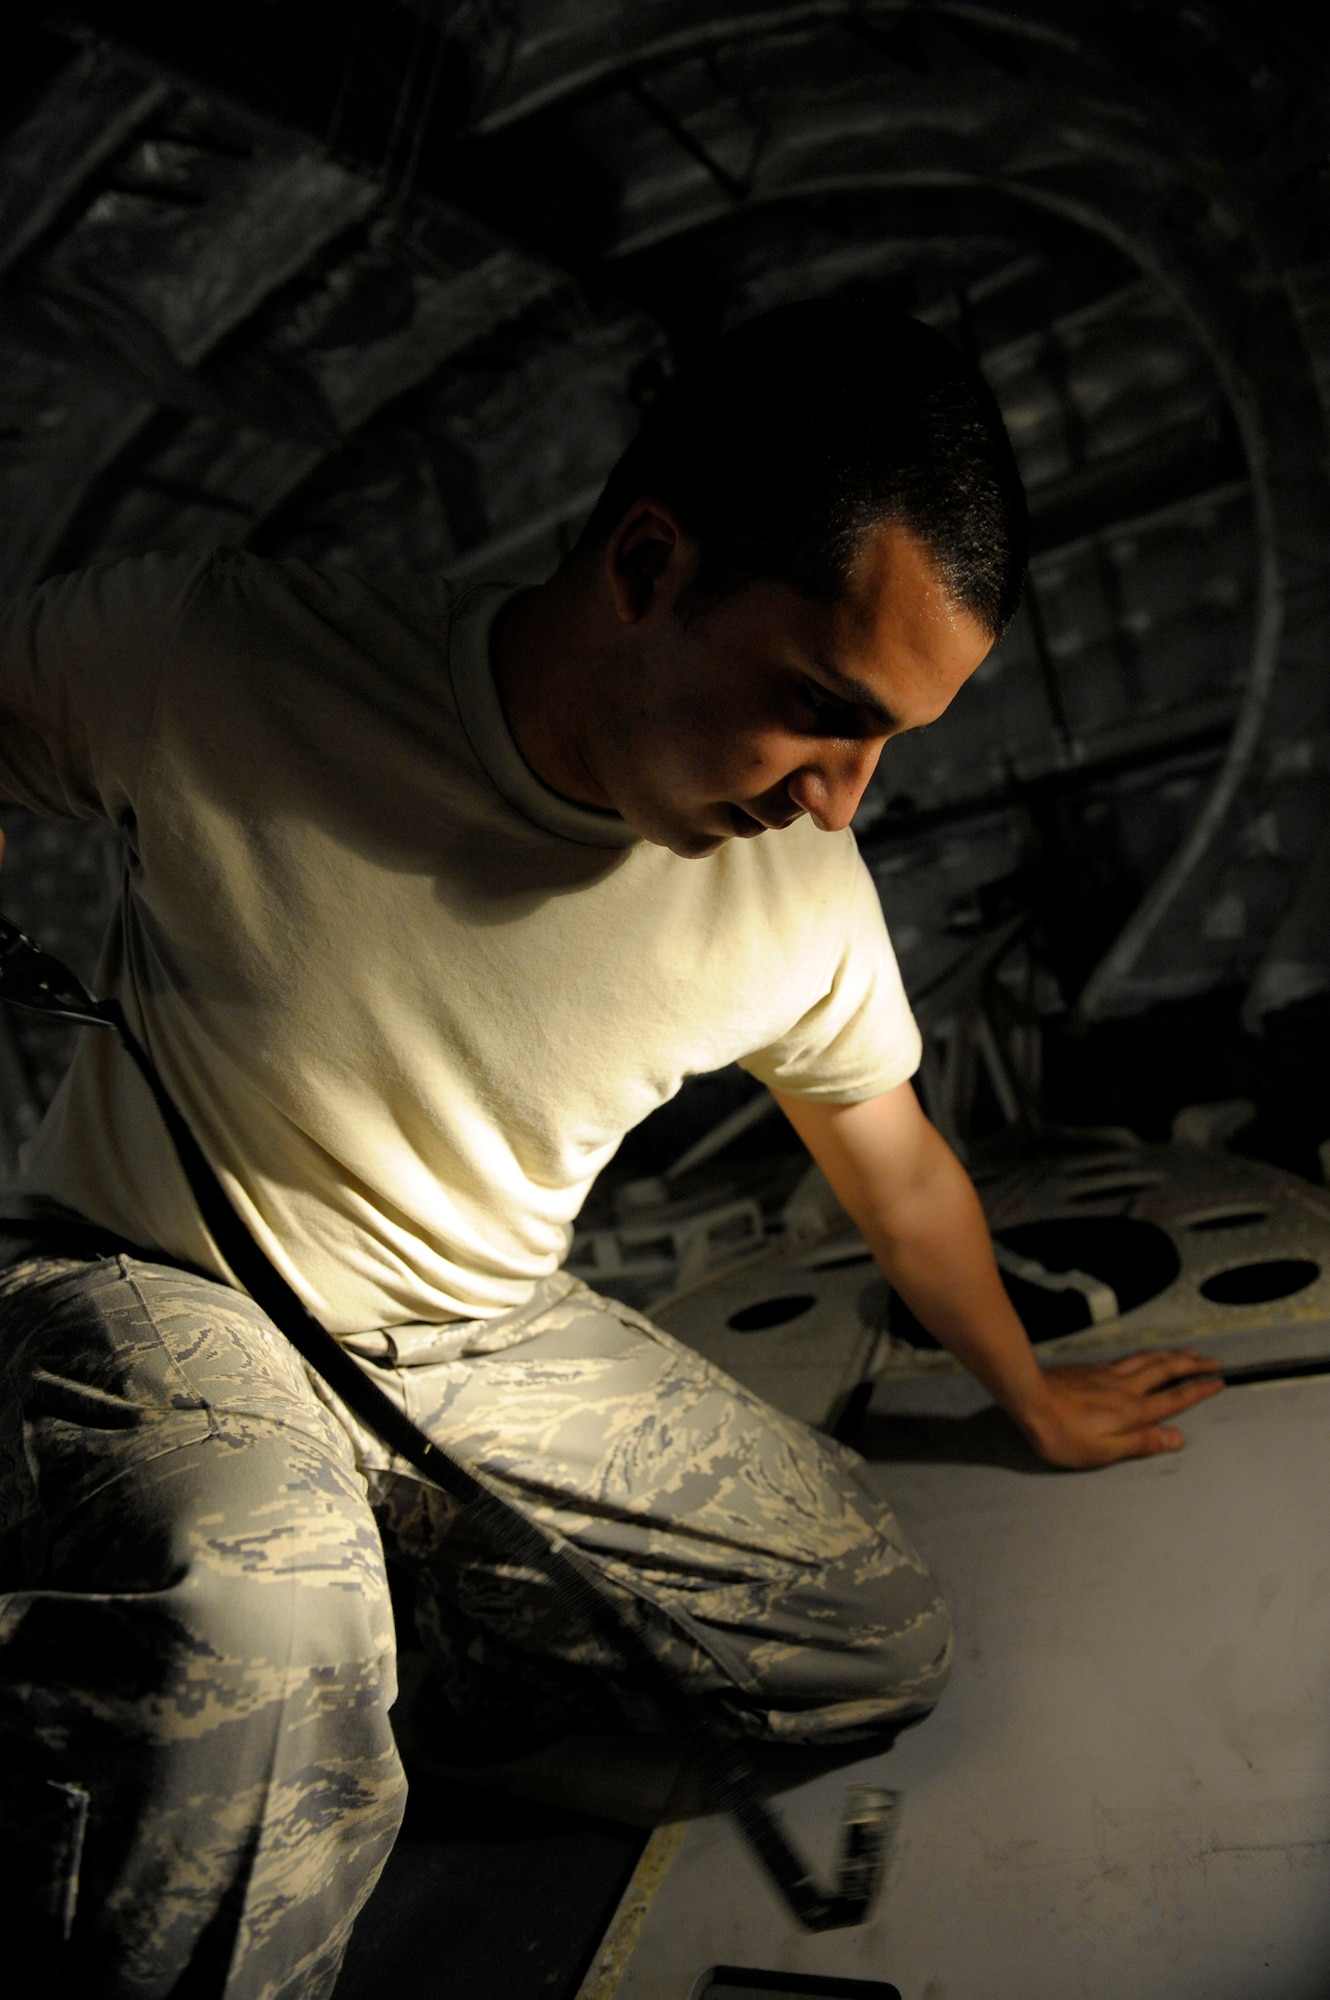 ELMENDORF AIR FORCE BASE, Alaska -- Airman 1st Class Manuel Padilla reinstalls new Velcro on the back floor of a C-17 Globemaster III. Padilla is part of an 11-man crew that is preparing for the Air Mobility Command Rodeo at McChord Air Force Base, Wash., July 18-26. (U.S. Air Force photo/Master Sgt. Keith Brown)